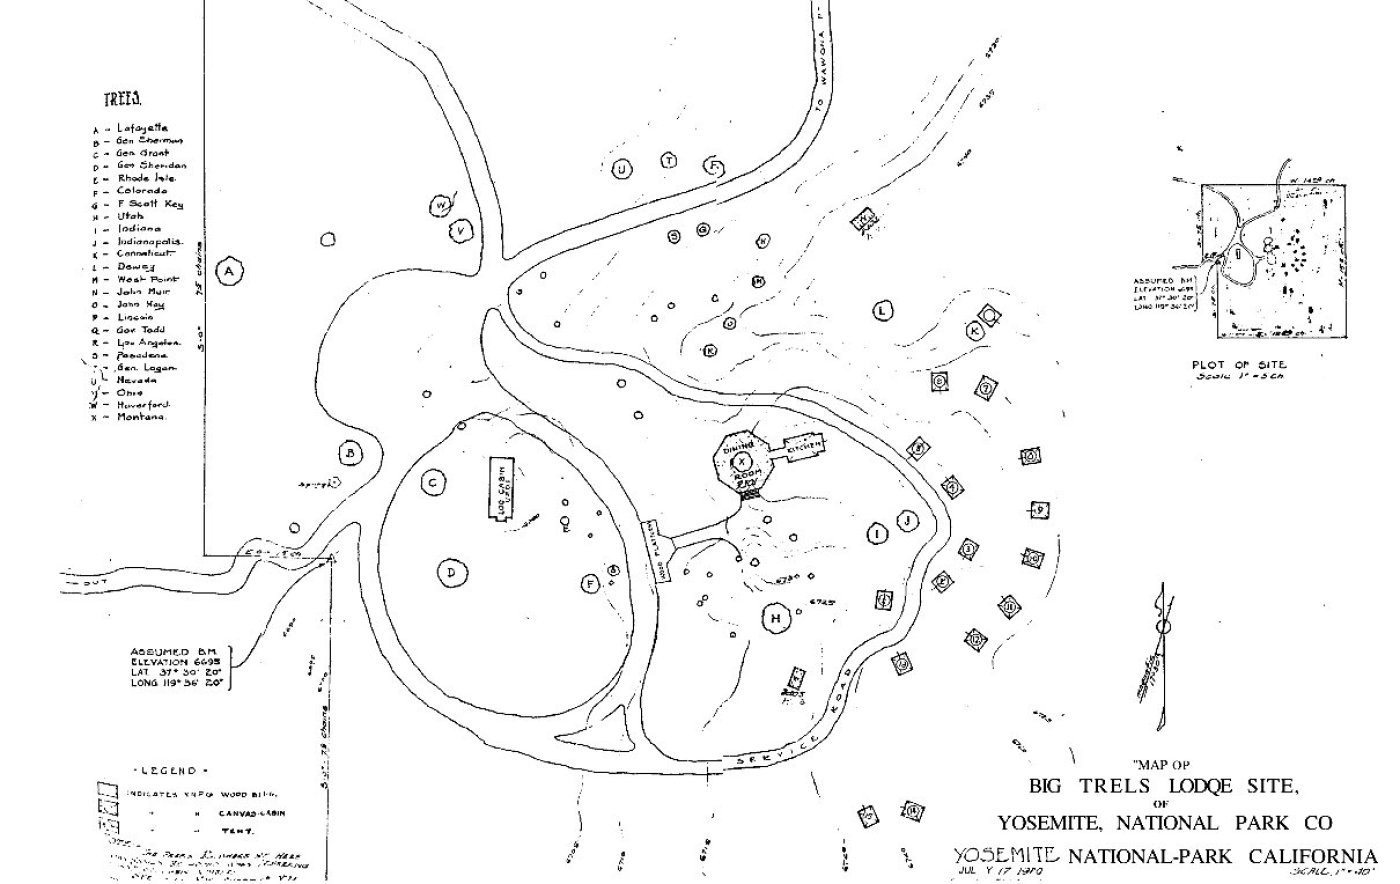 Map of Big Trees Lodge site, 17 July 1920, revised 1923